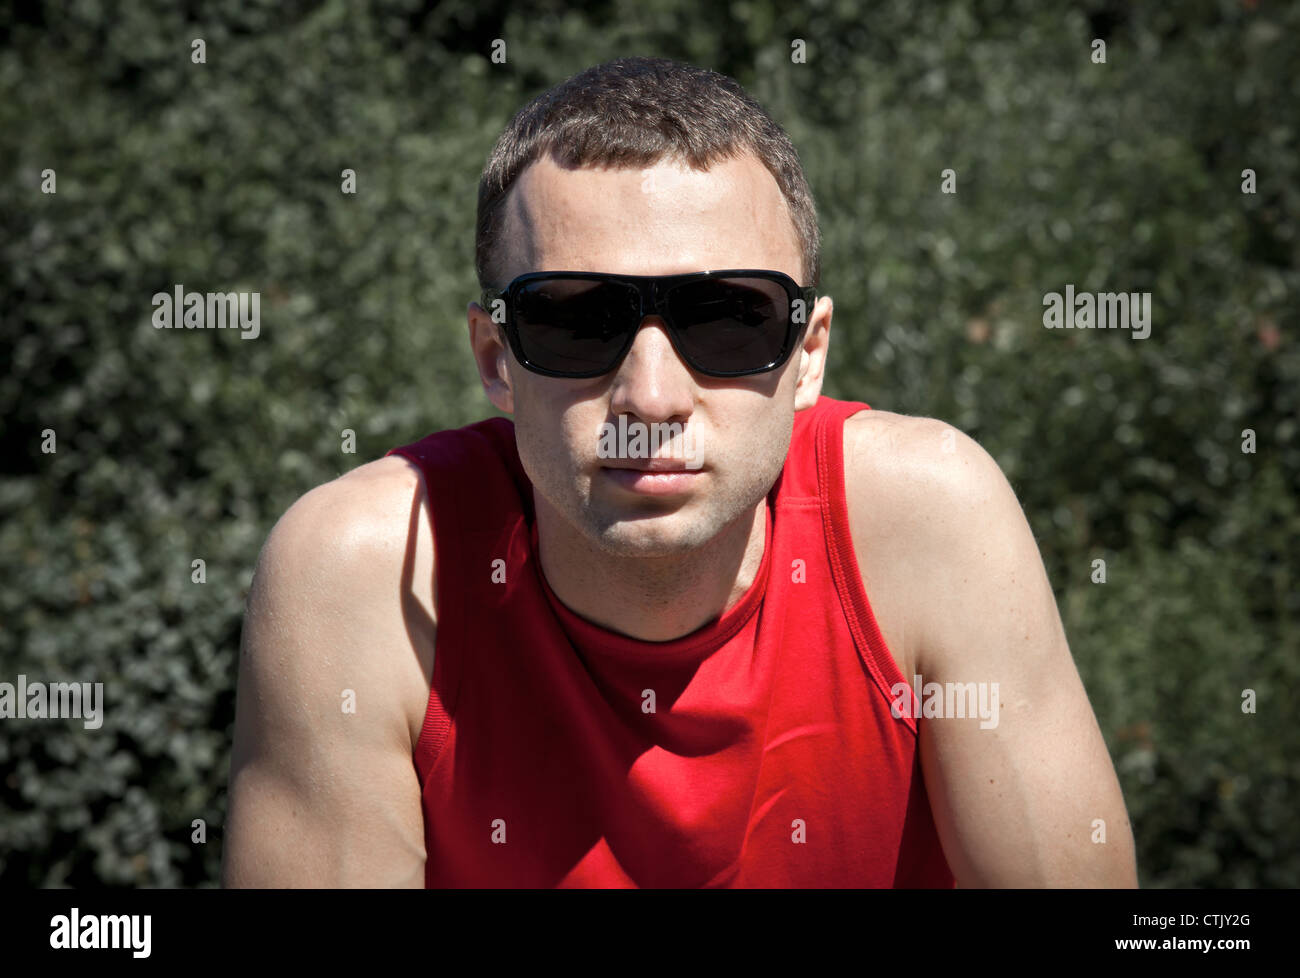 Closeup outdoor portrait of young man in black sunglasses Stock Photo